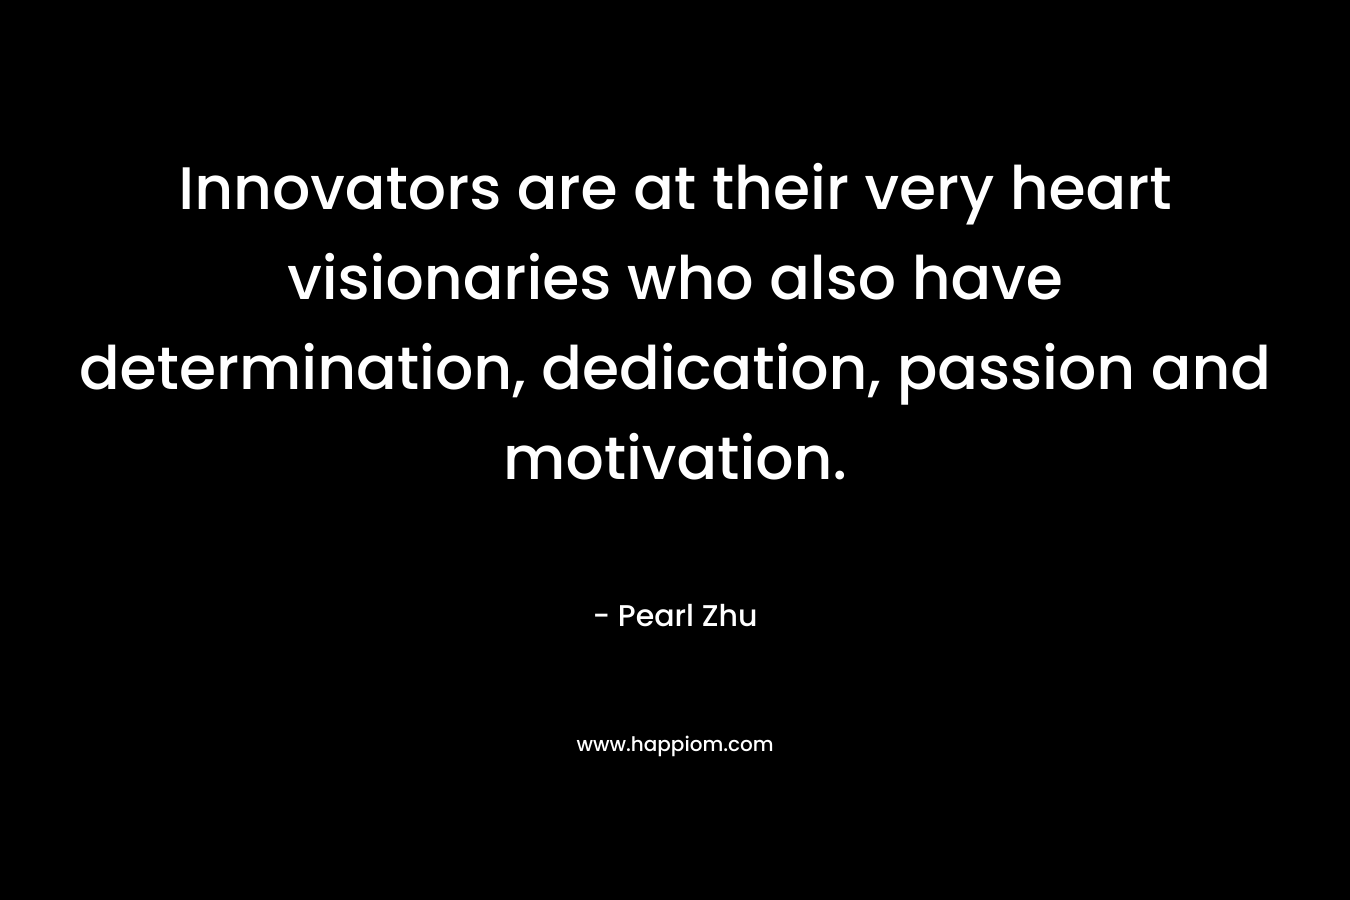 Innovators are at their very heart visionaries who also have determination, dedication, passion and motivation. – Pearl Zhu